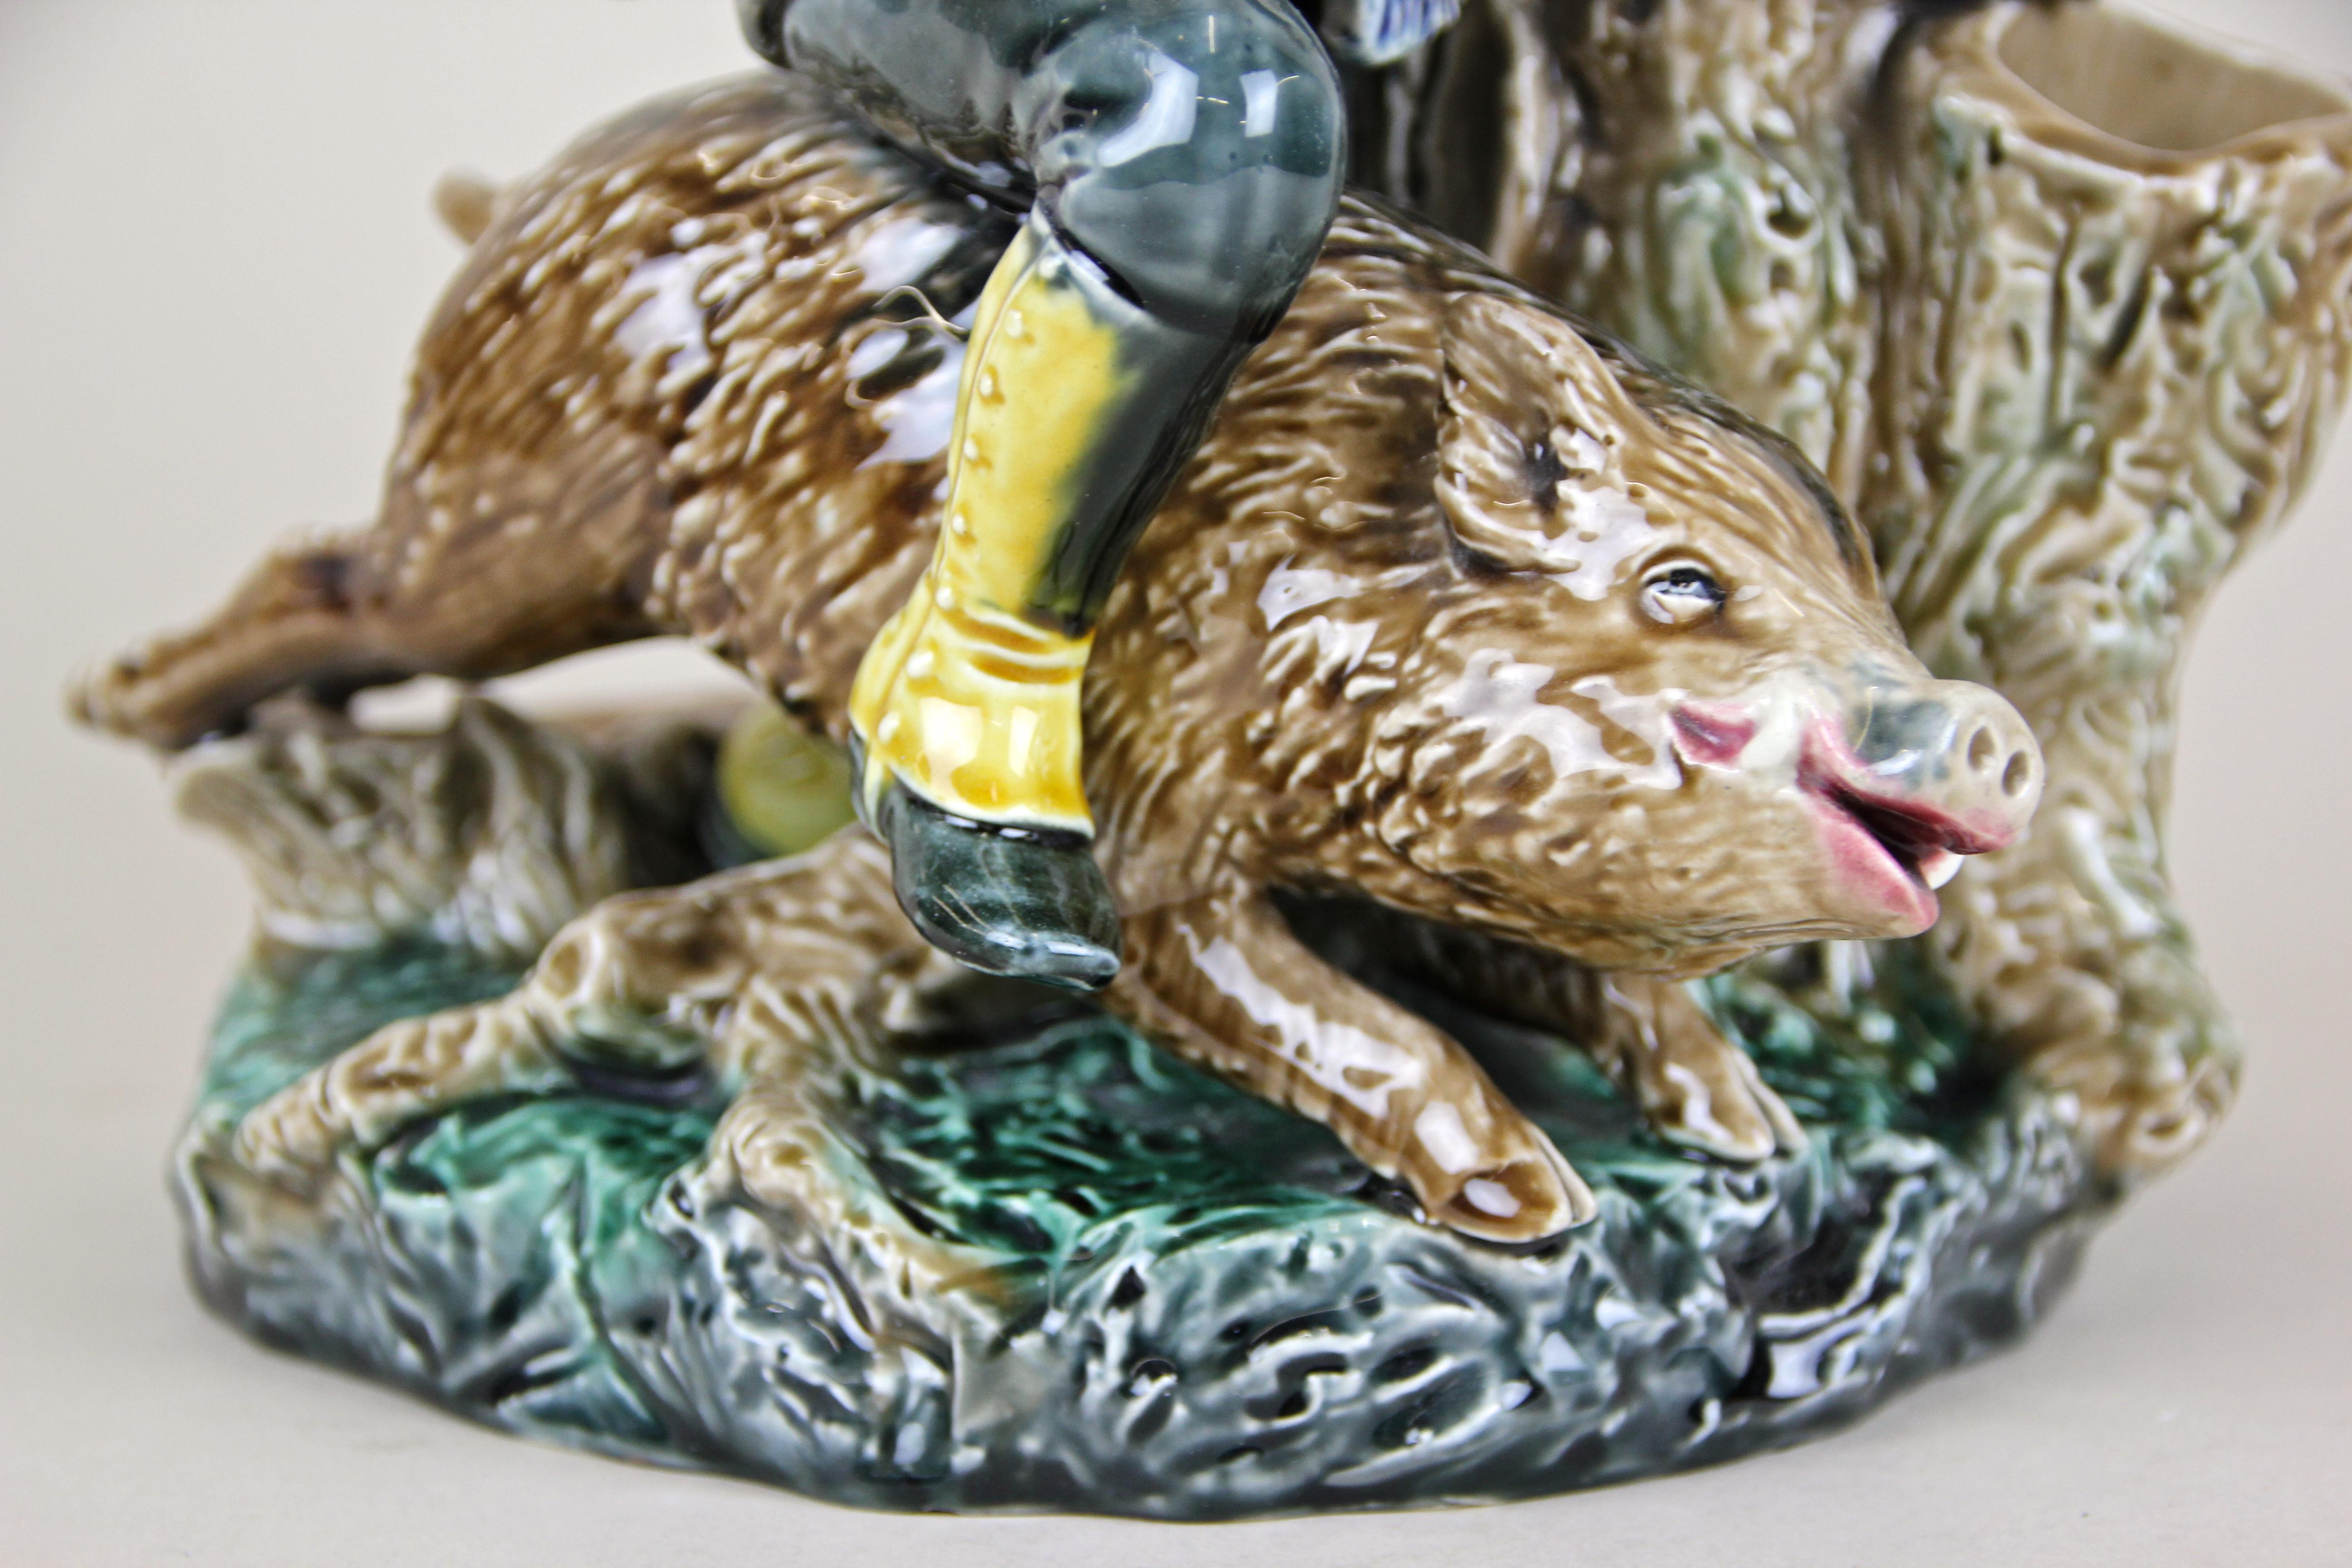 Absolute rare Majolica sculpture from the early 20th century by Bernhard Bloch, Eichwald. This extraordinary piece of Majolica art from circa 1900 depicts the famous Austrian emperor Franz Joseph I. in his hunting outfit riding a wild boar. A real